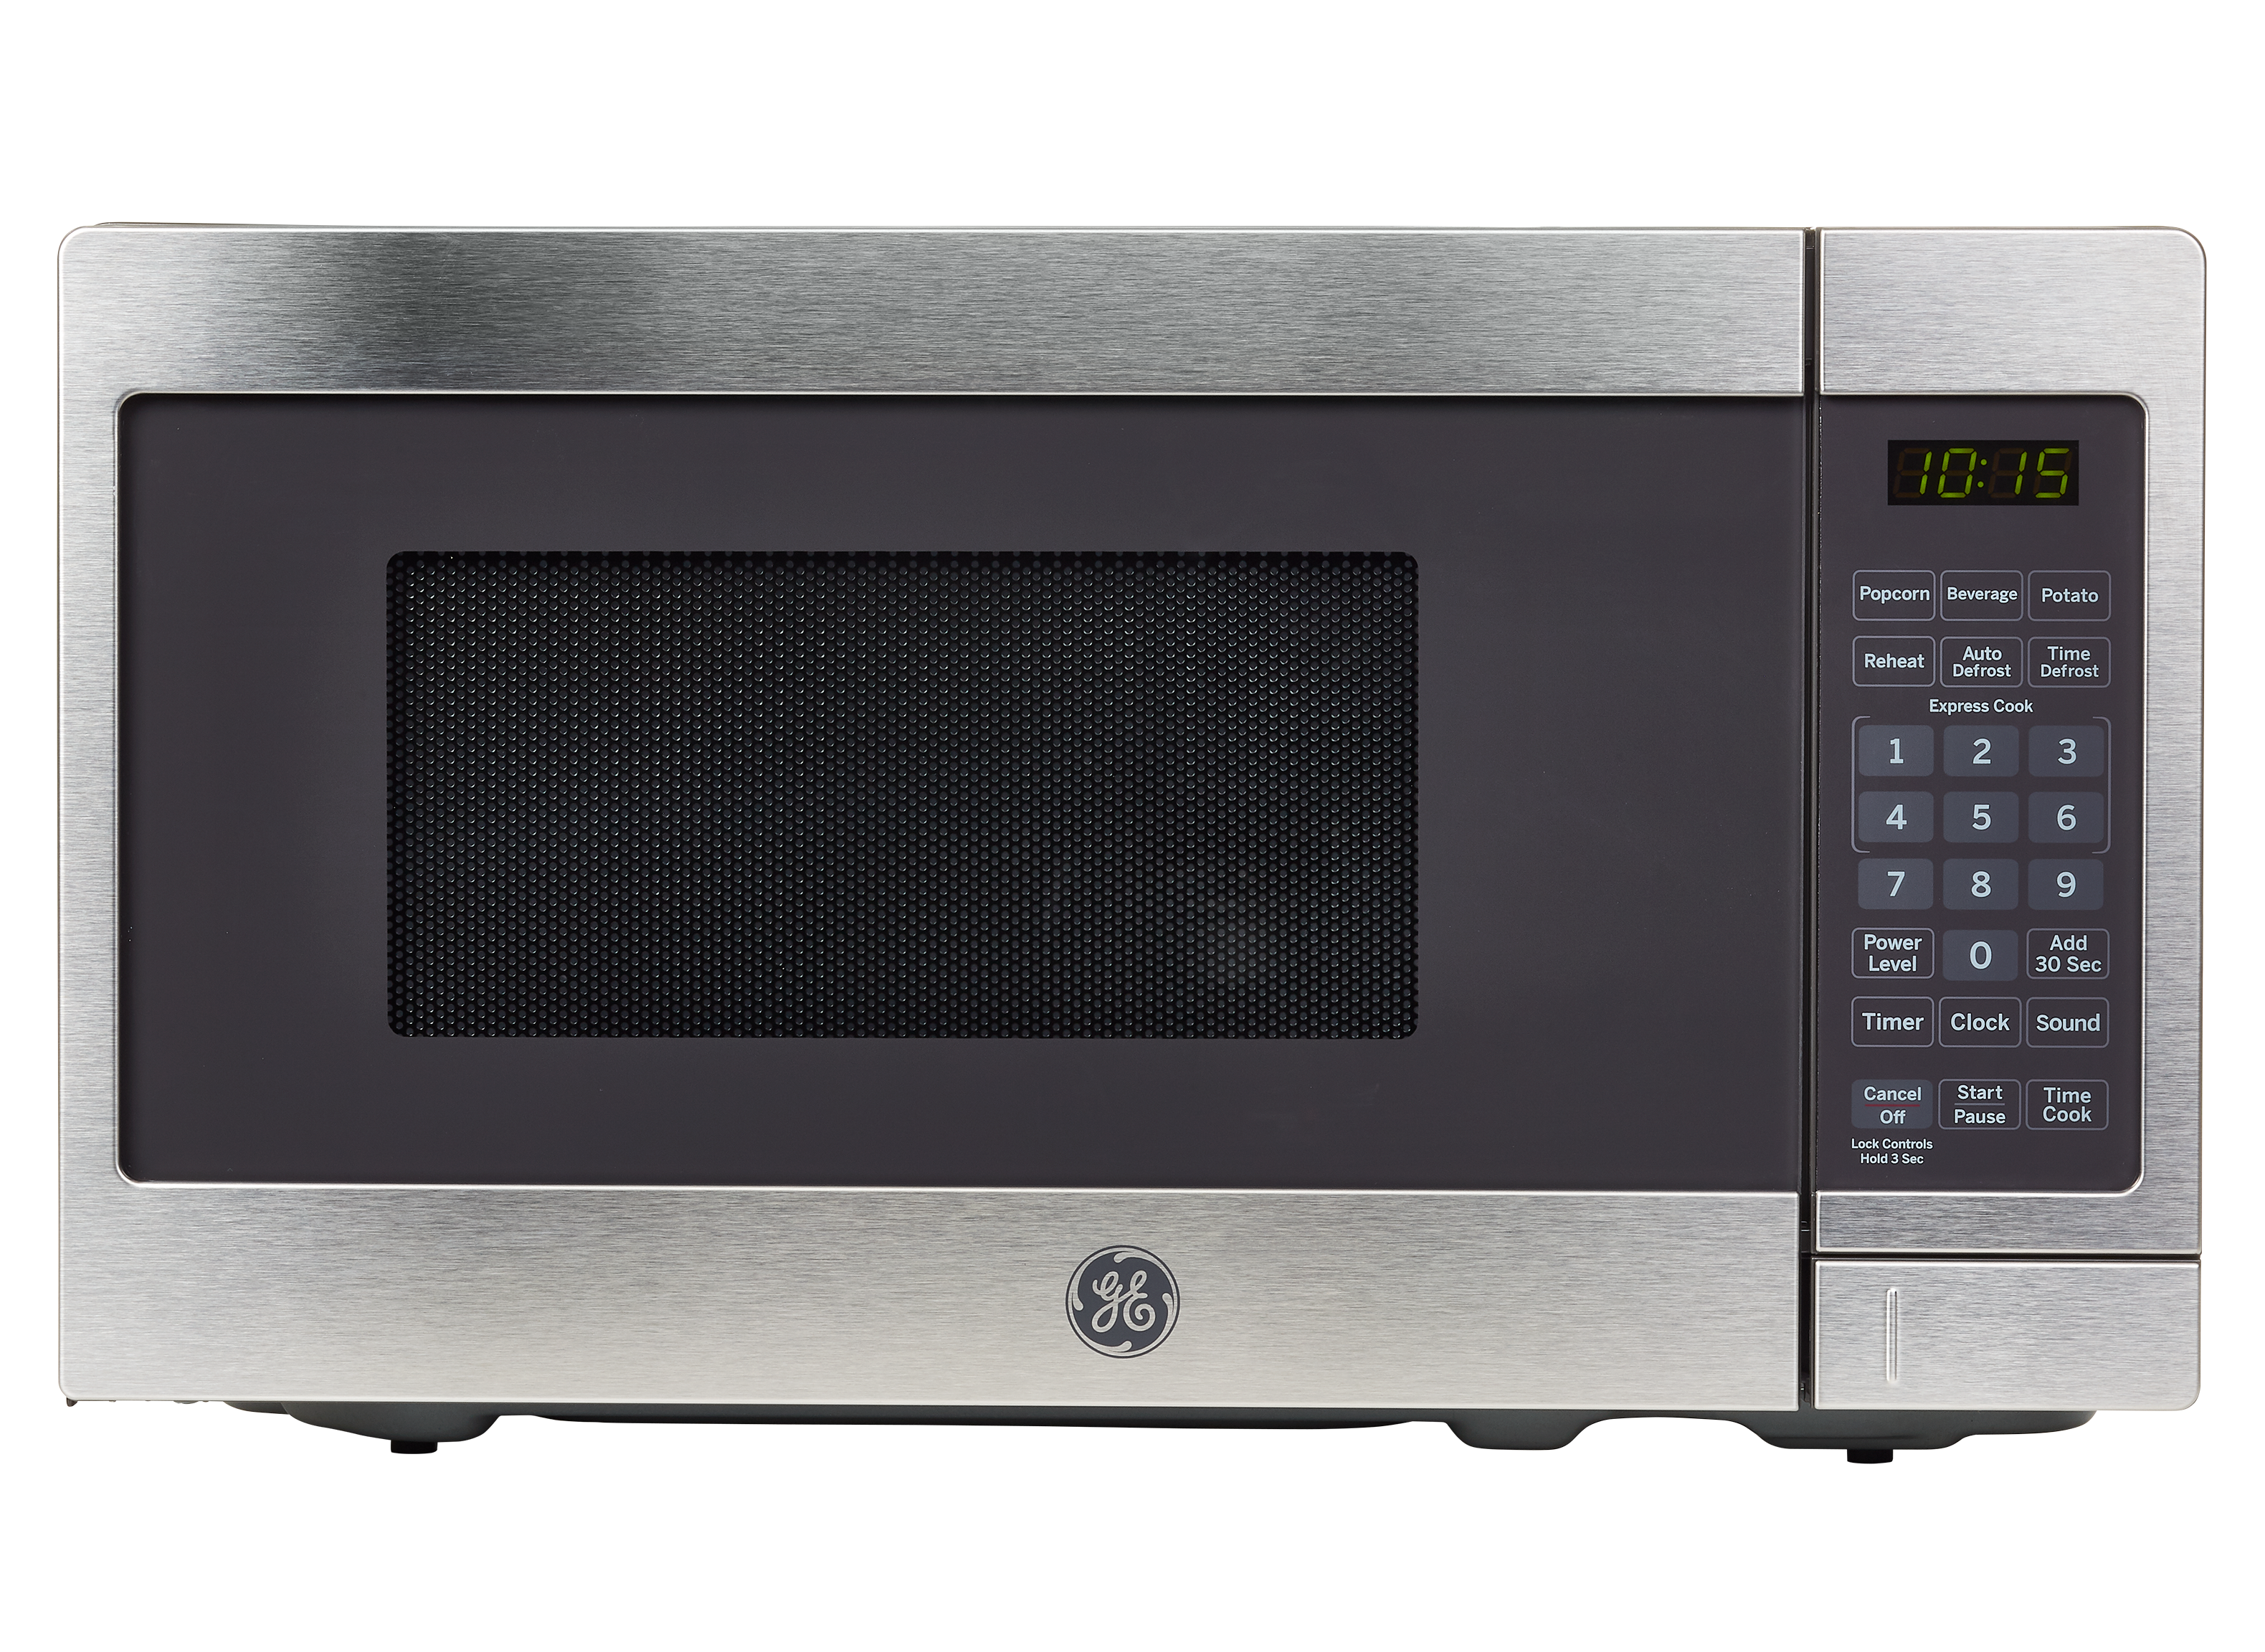 https://crdms.images.consumerreports.org/prod/products/cr/models/394814-small-countertop-microwaves-ge-jem3072shss-59899.png